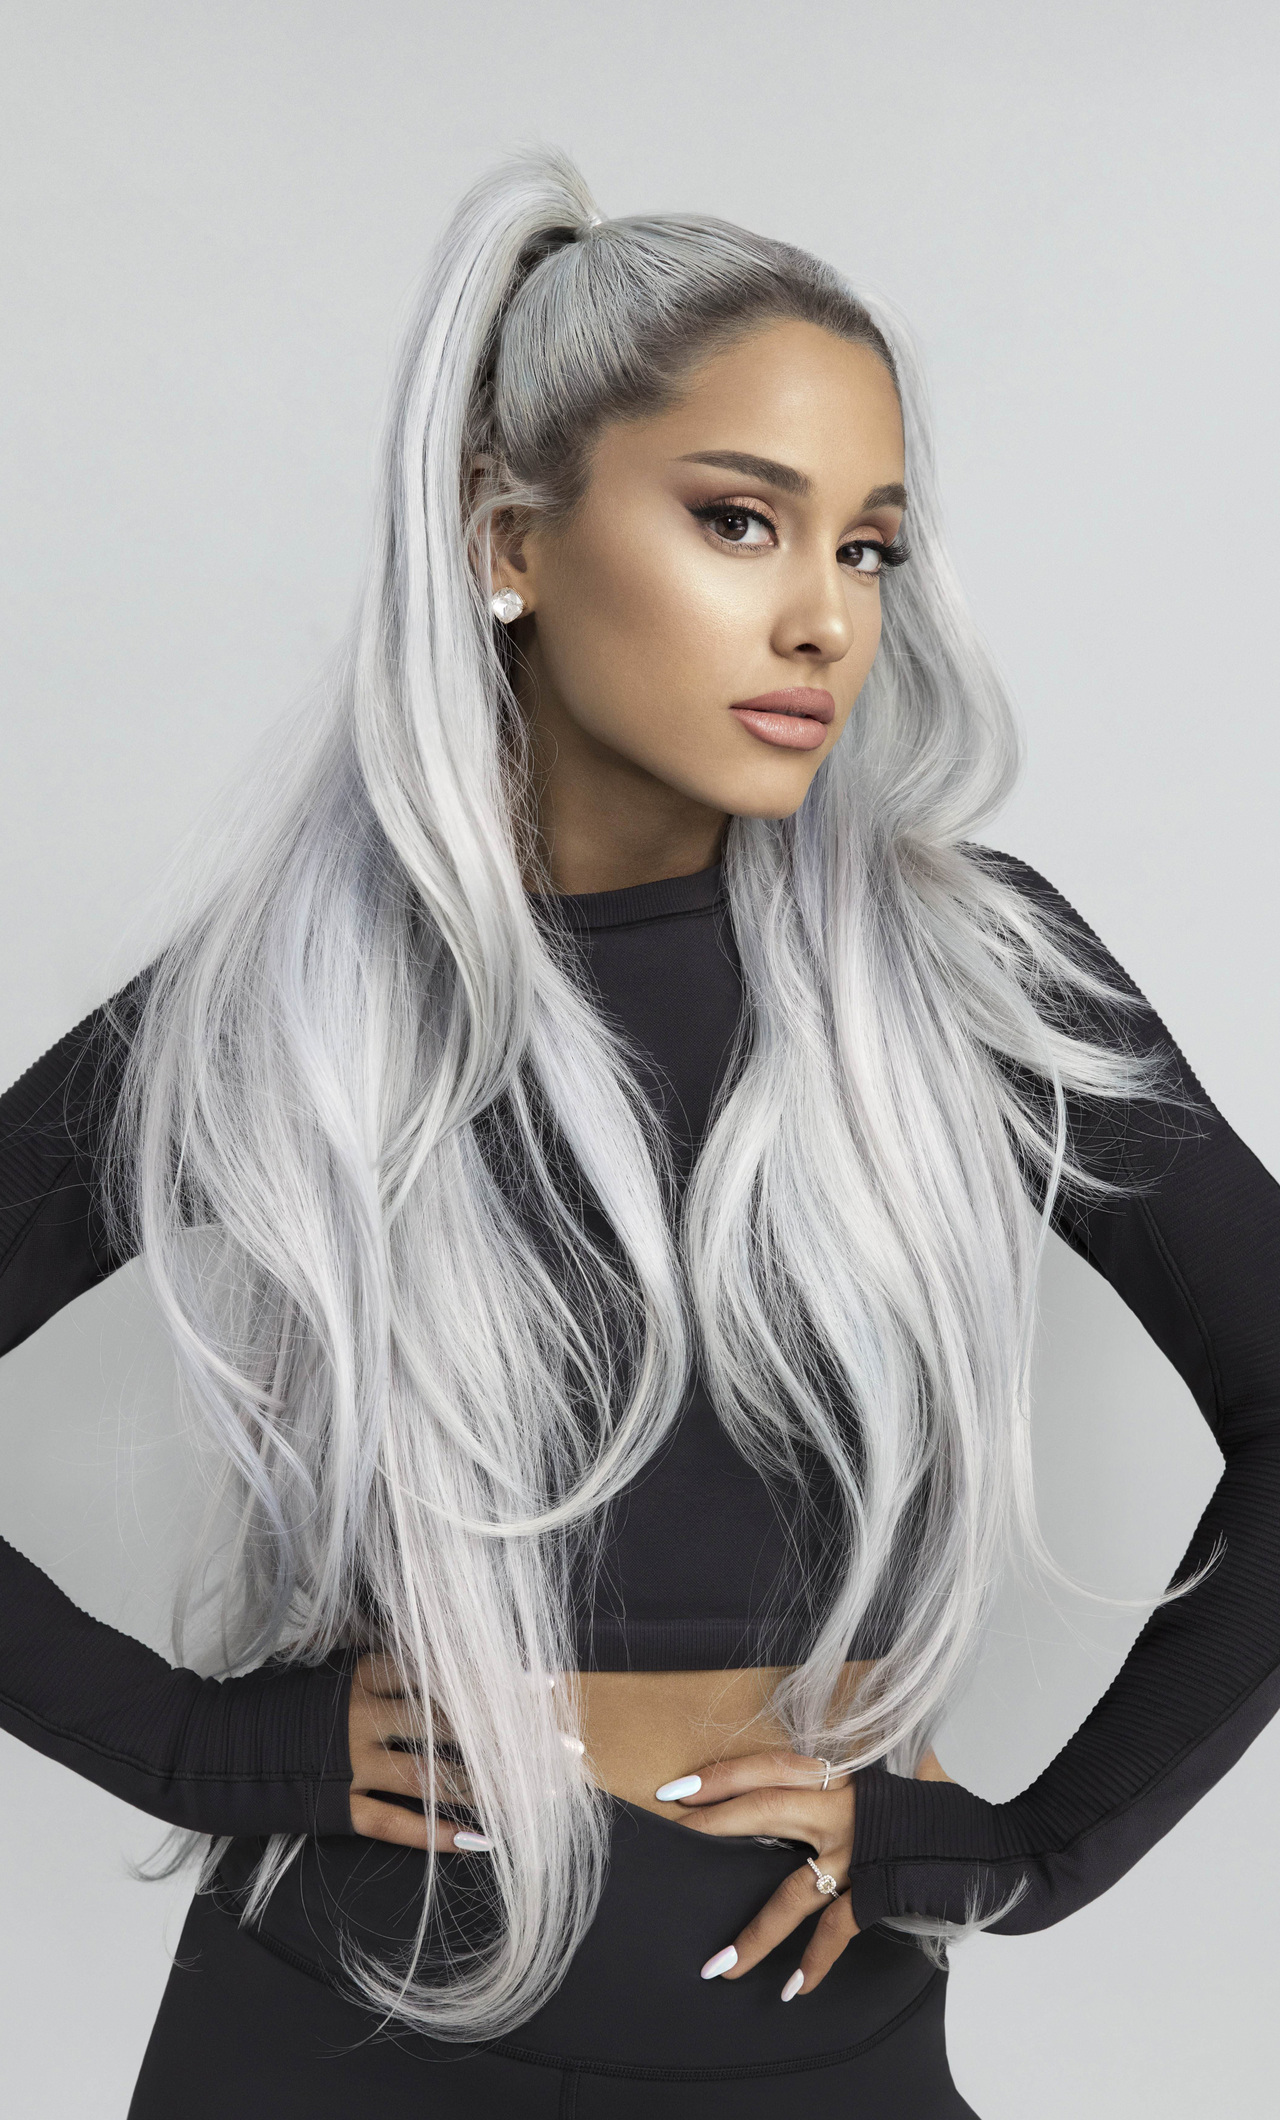 Ariana Grande Reebok Photoshoot 5k 6+ HD 4k Wallpapers, Images, Backgrounds, and Pictures